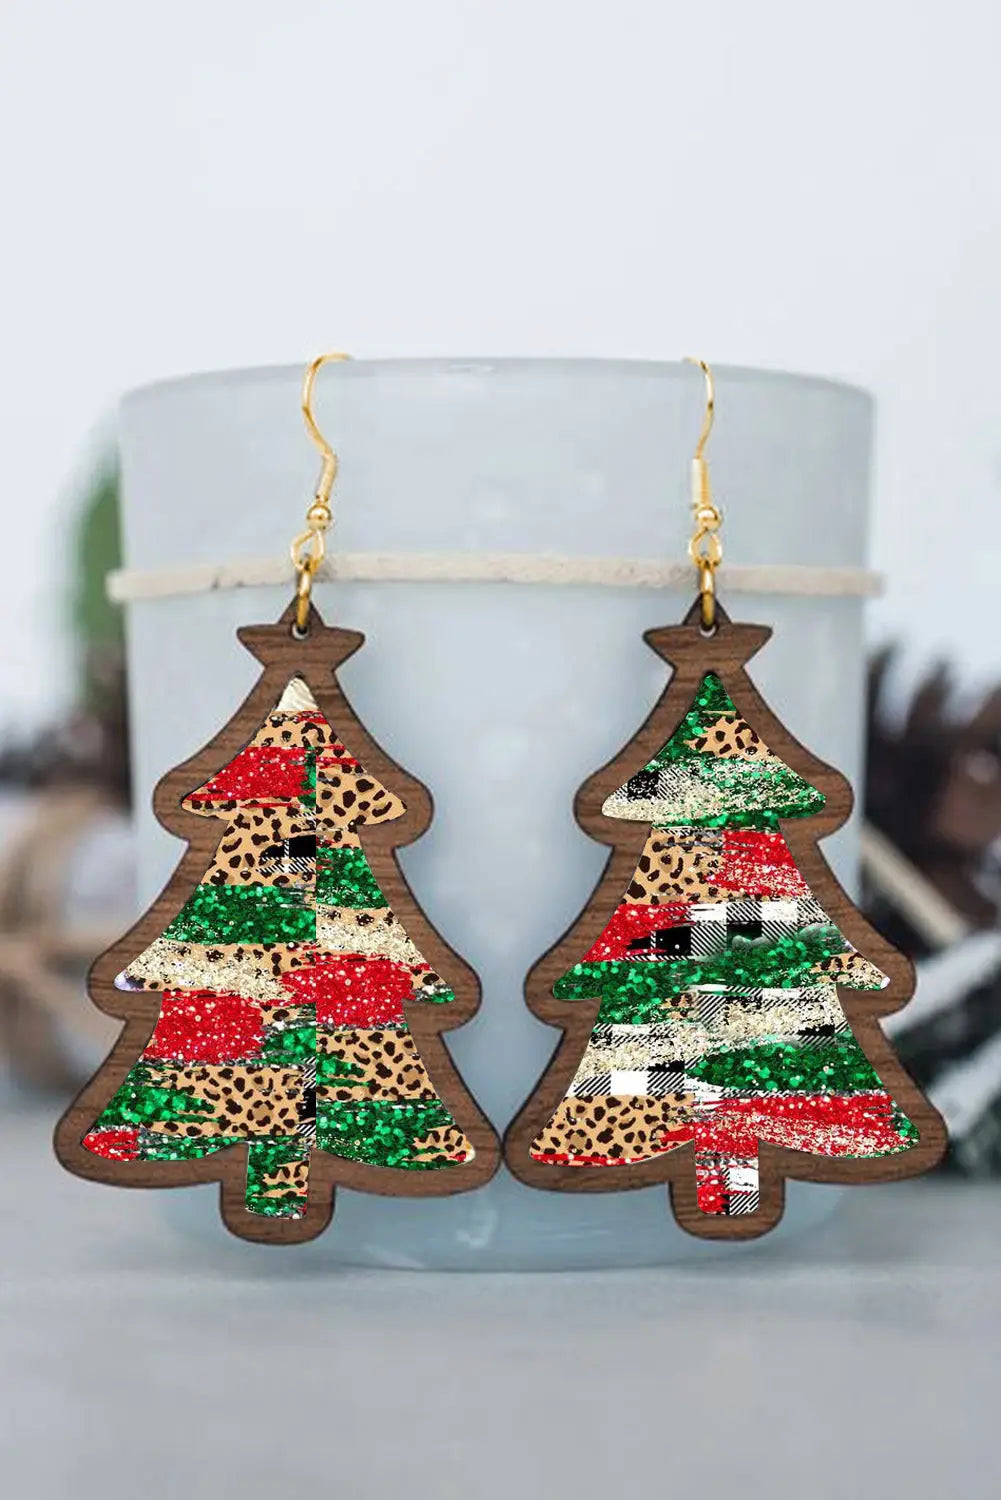 Fiery red shade of leopard plaid christmas tree earrings - one size / 100% wood